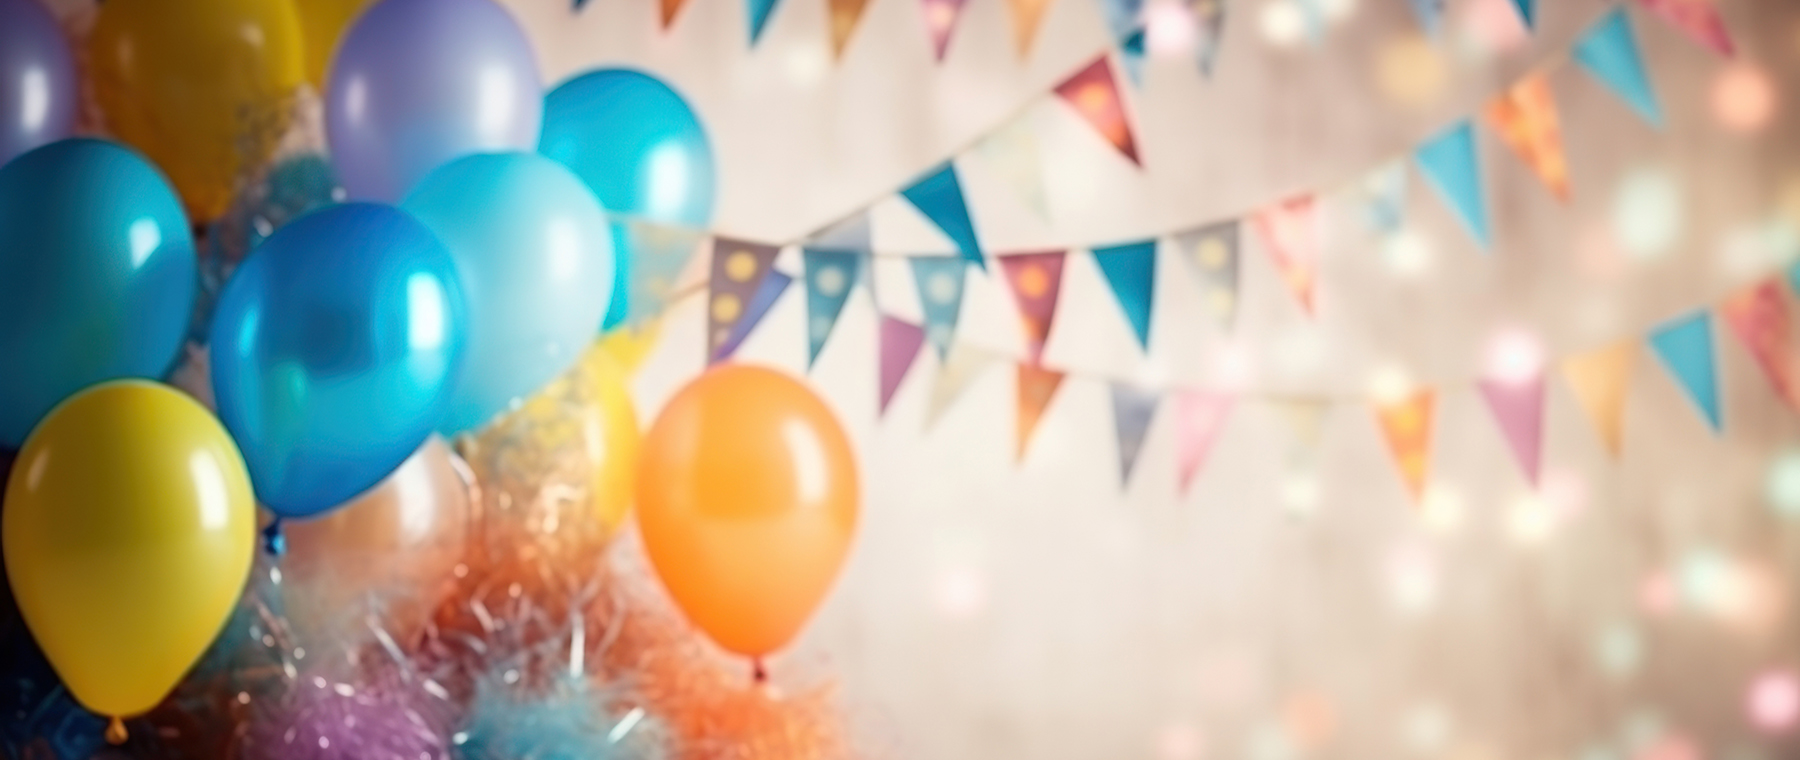 Birthday party background with balloons, streamers and confetti.